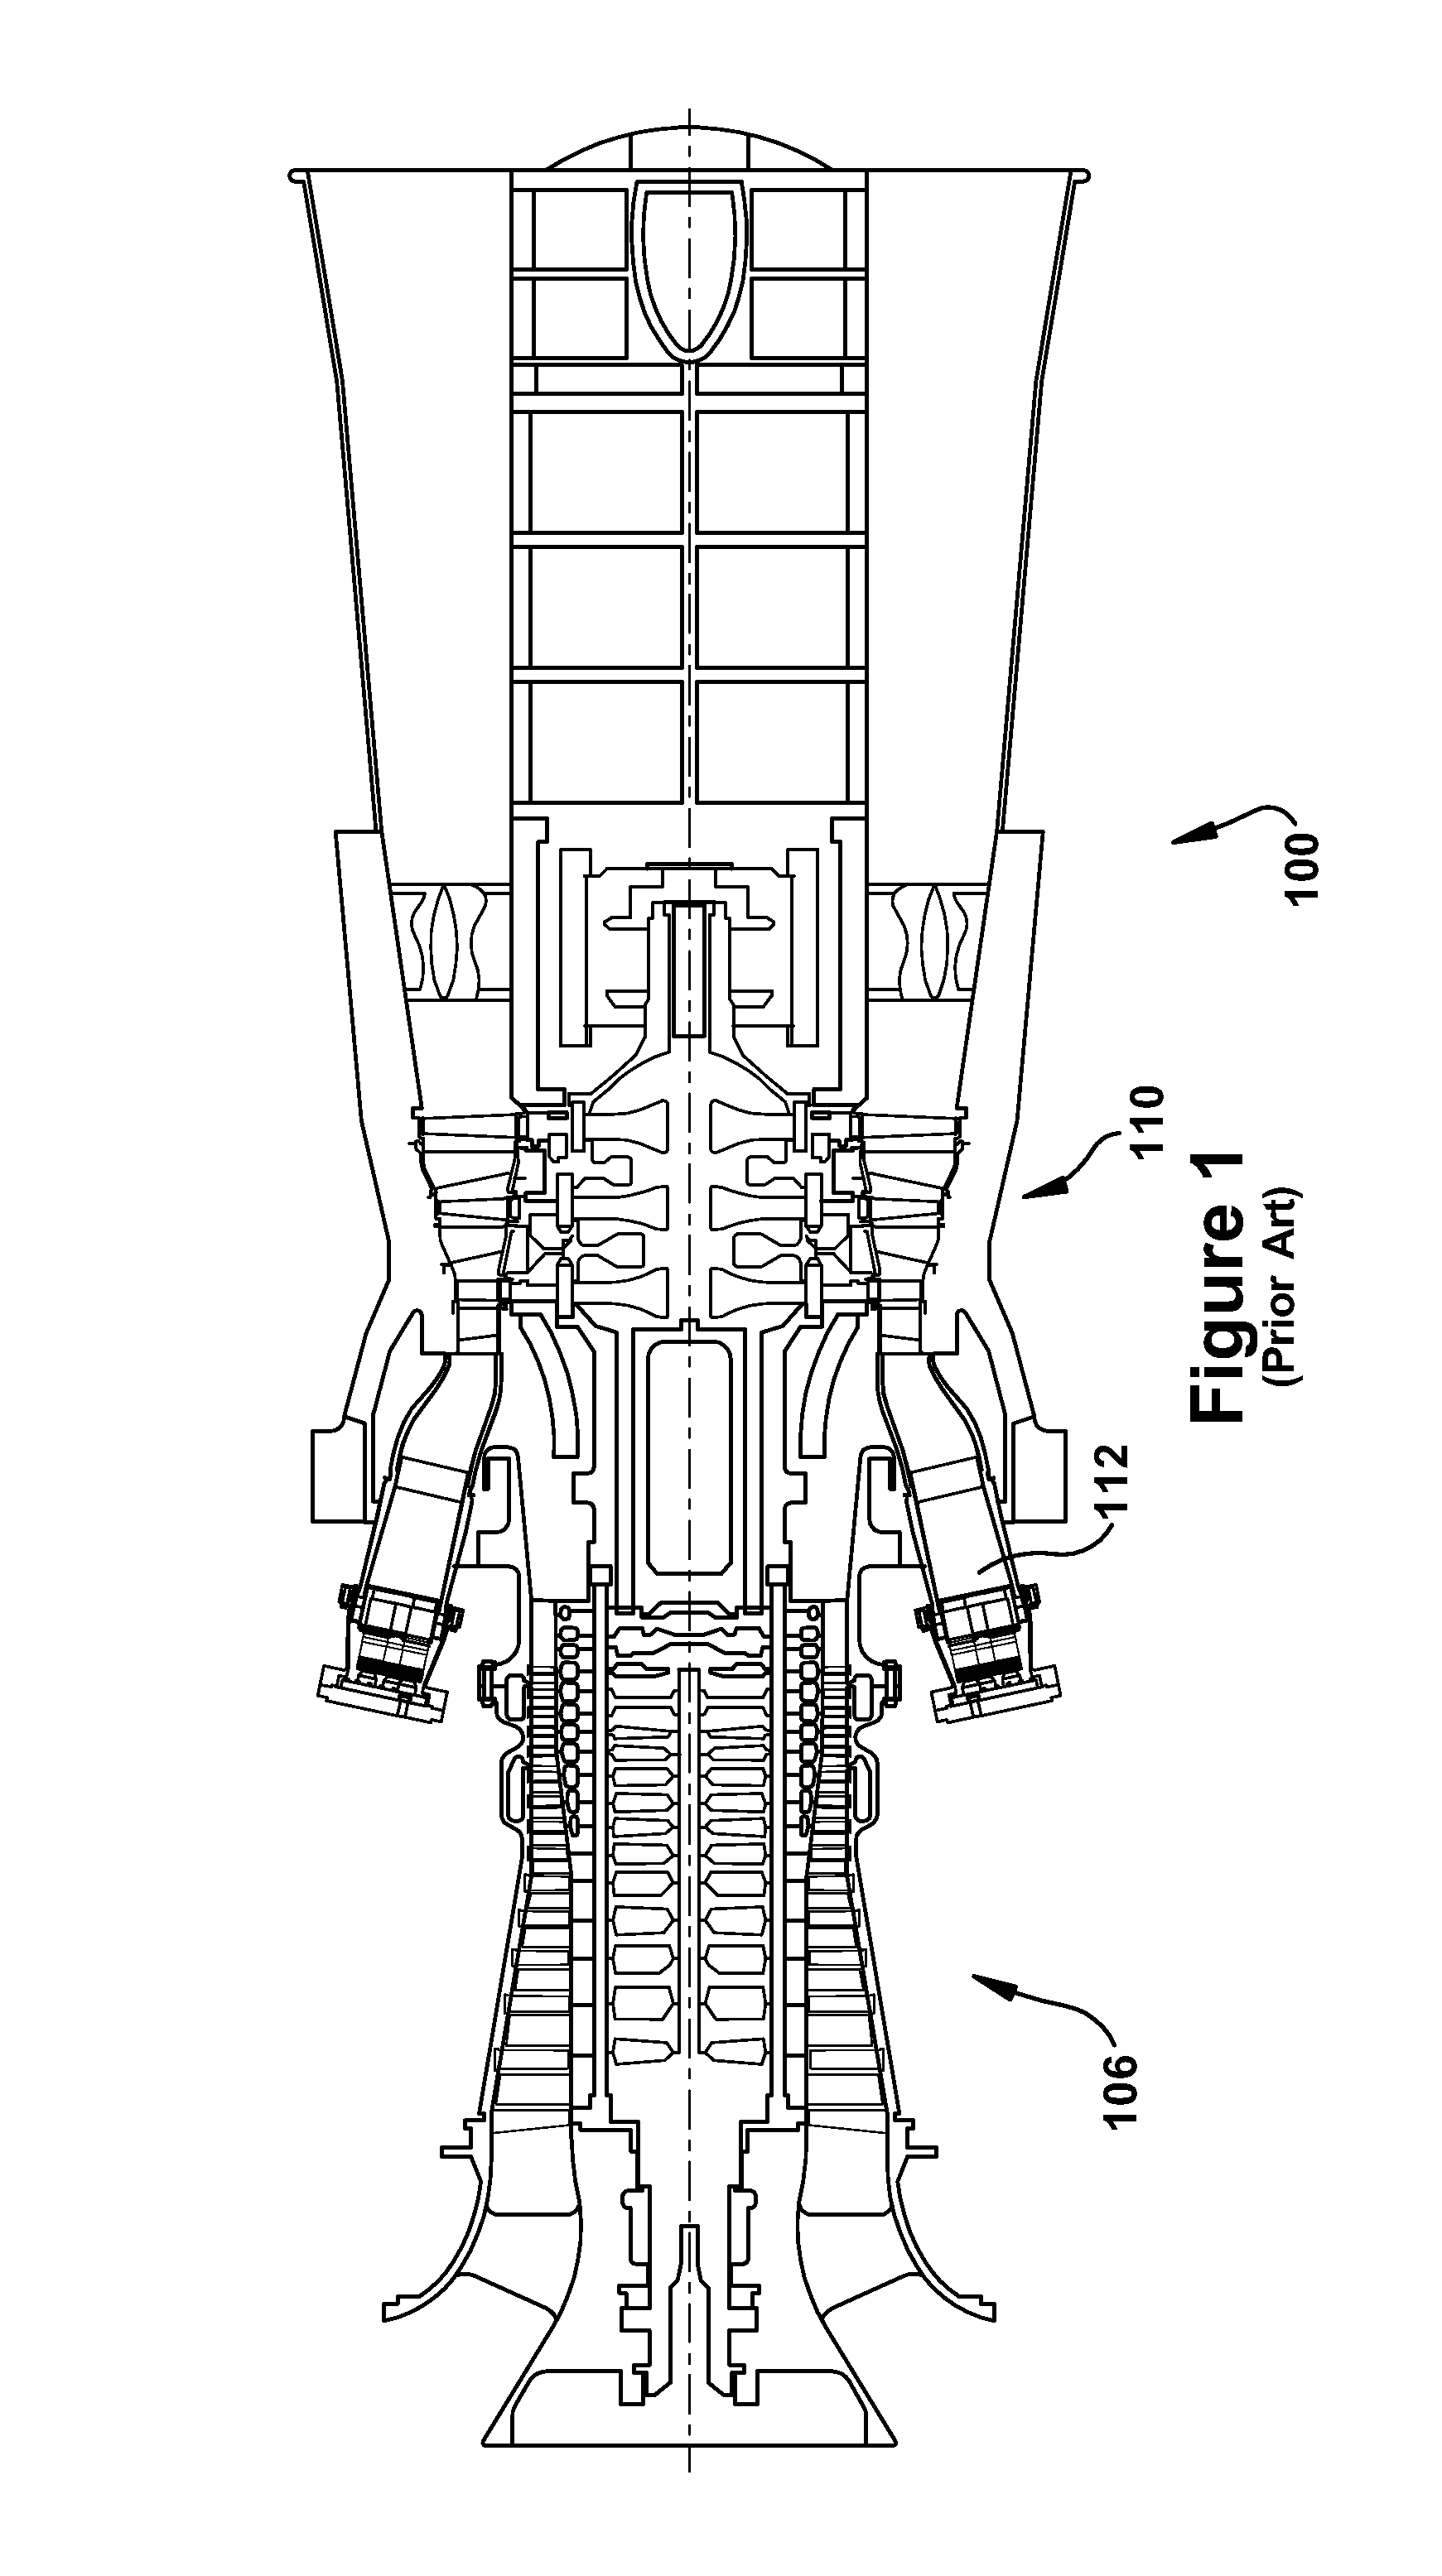 Systems and apparatus relating to seals for turbine engines